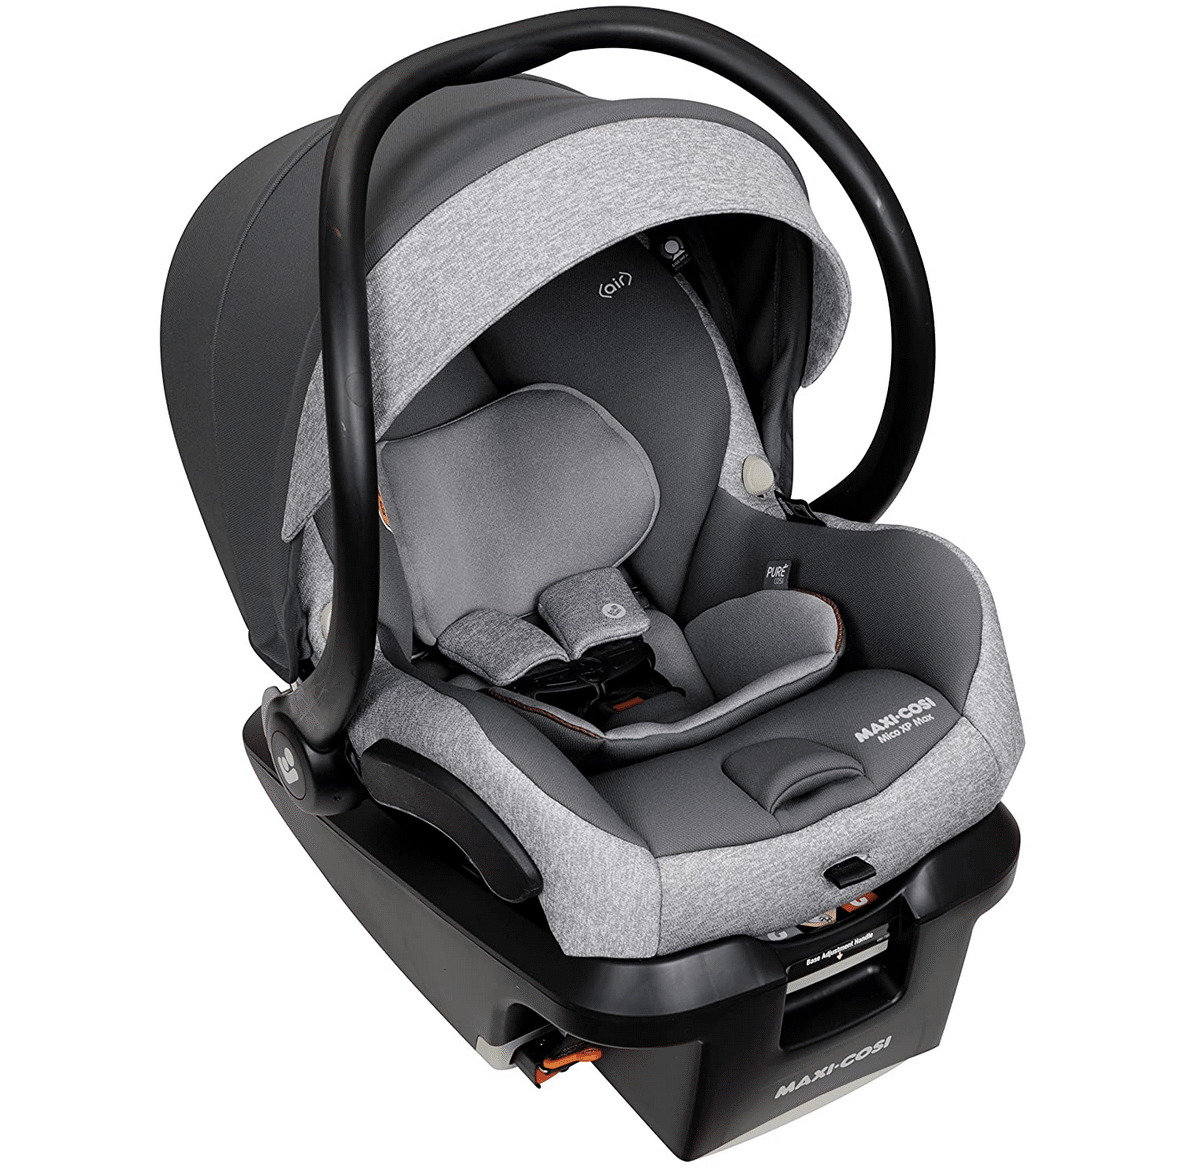 60,000 Safety 1st and MaxiCosi Car Seats Recalled